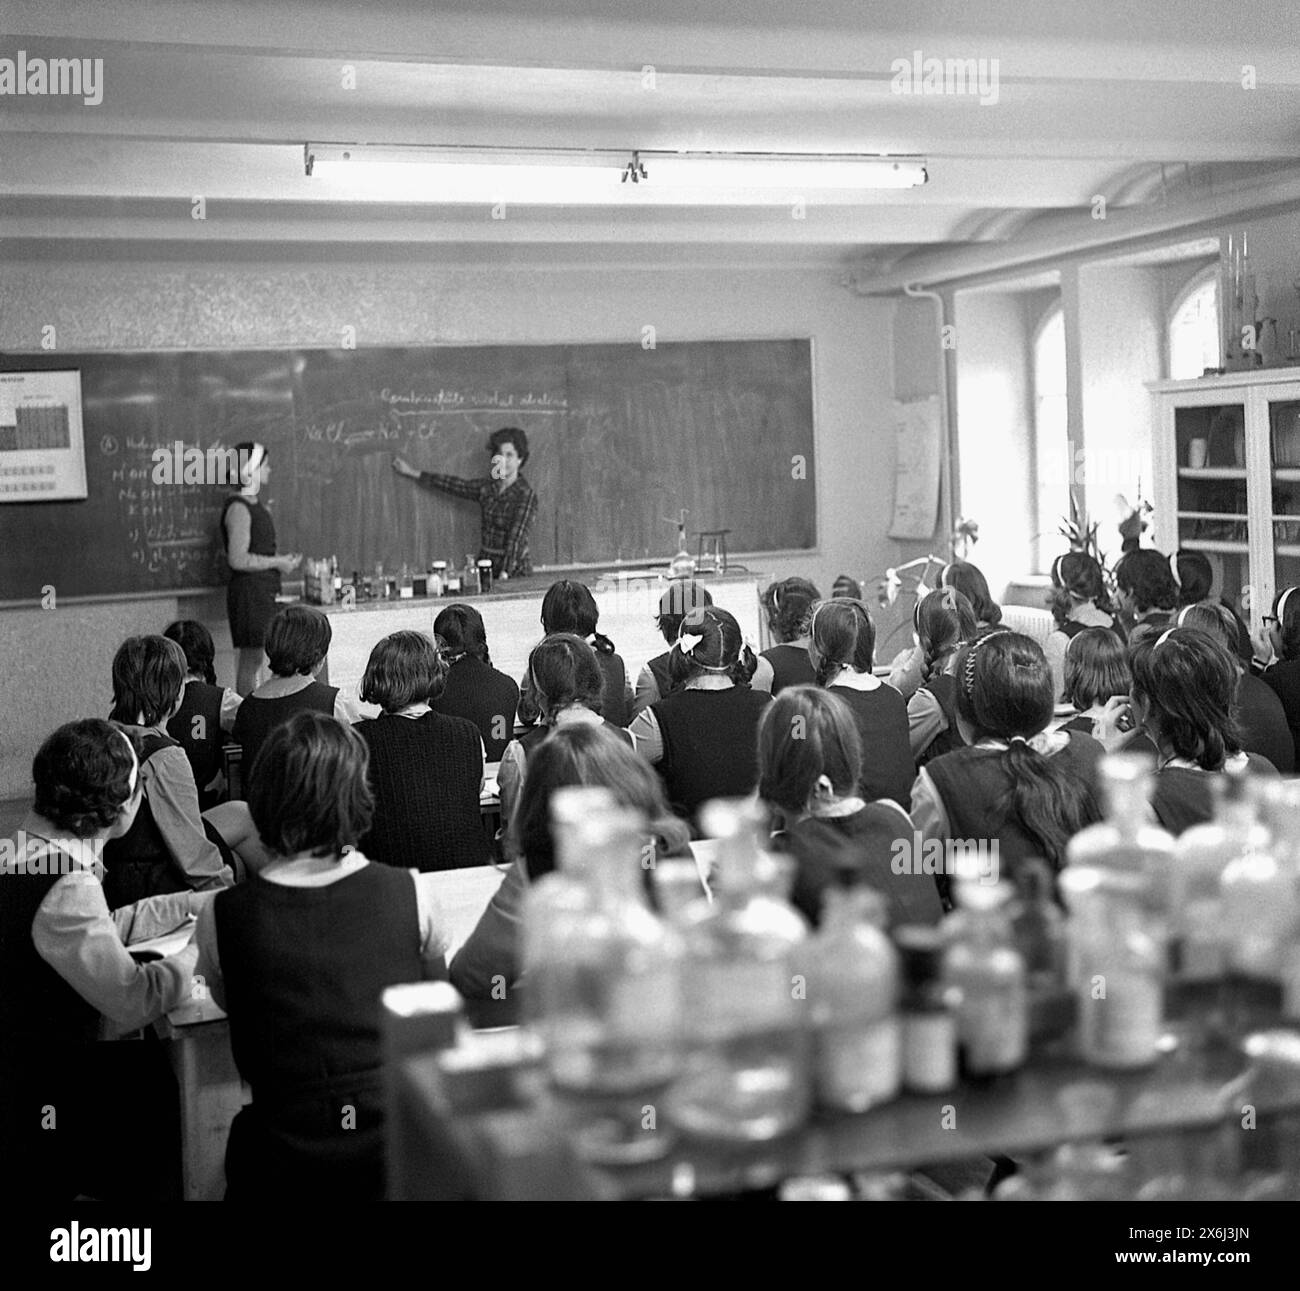 Socialist Republic of Romania in the 1970s. High-school students during a chemistry class in a governmental school. Stock Photo